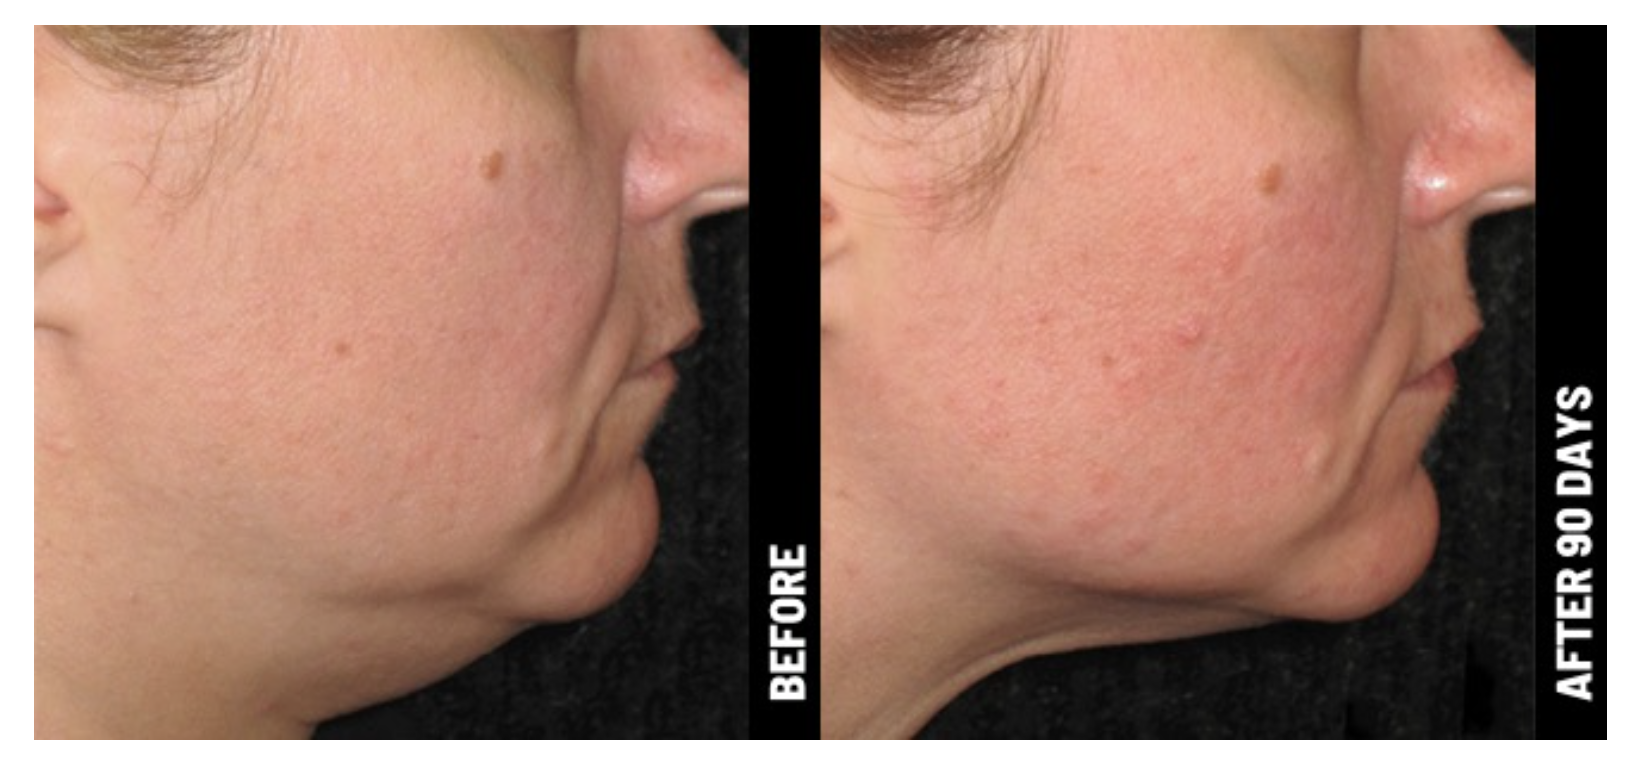 women-before-and-after-image-ultherapy-chin.png